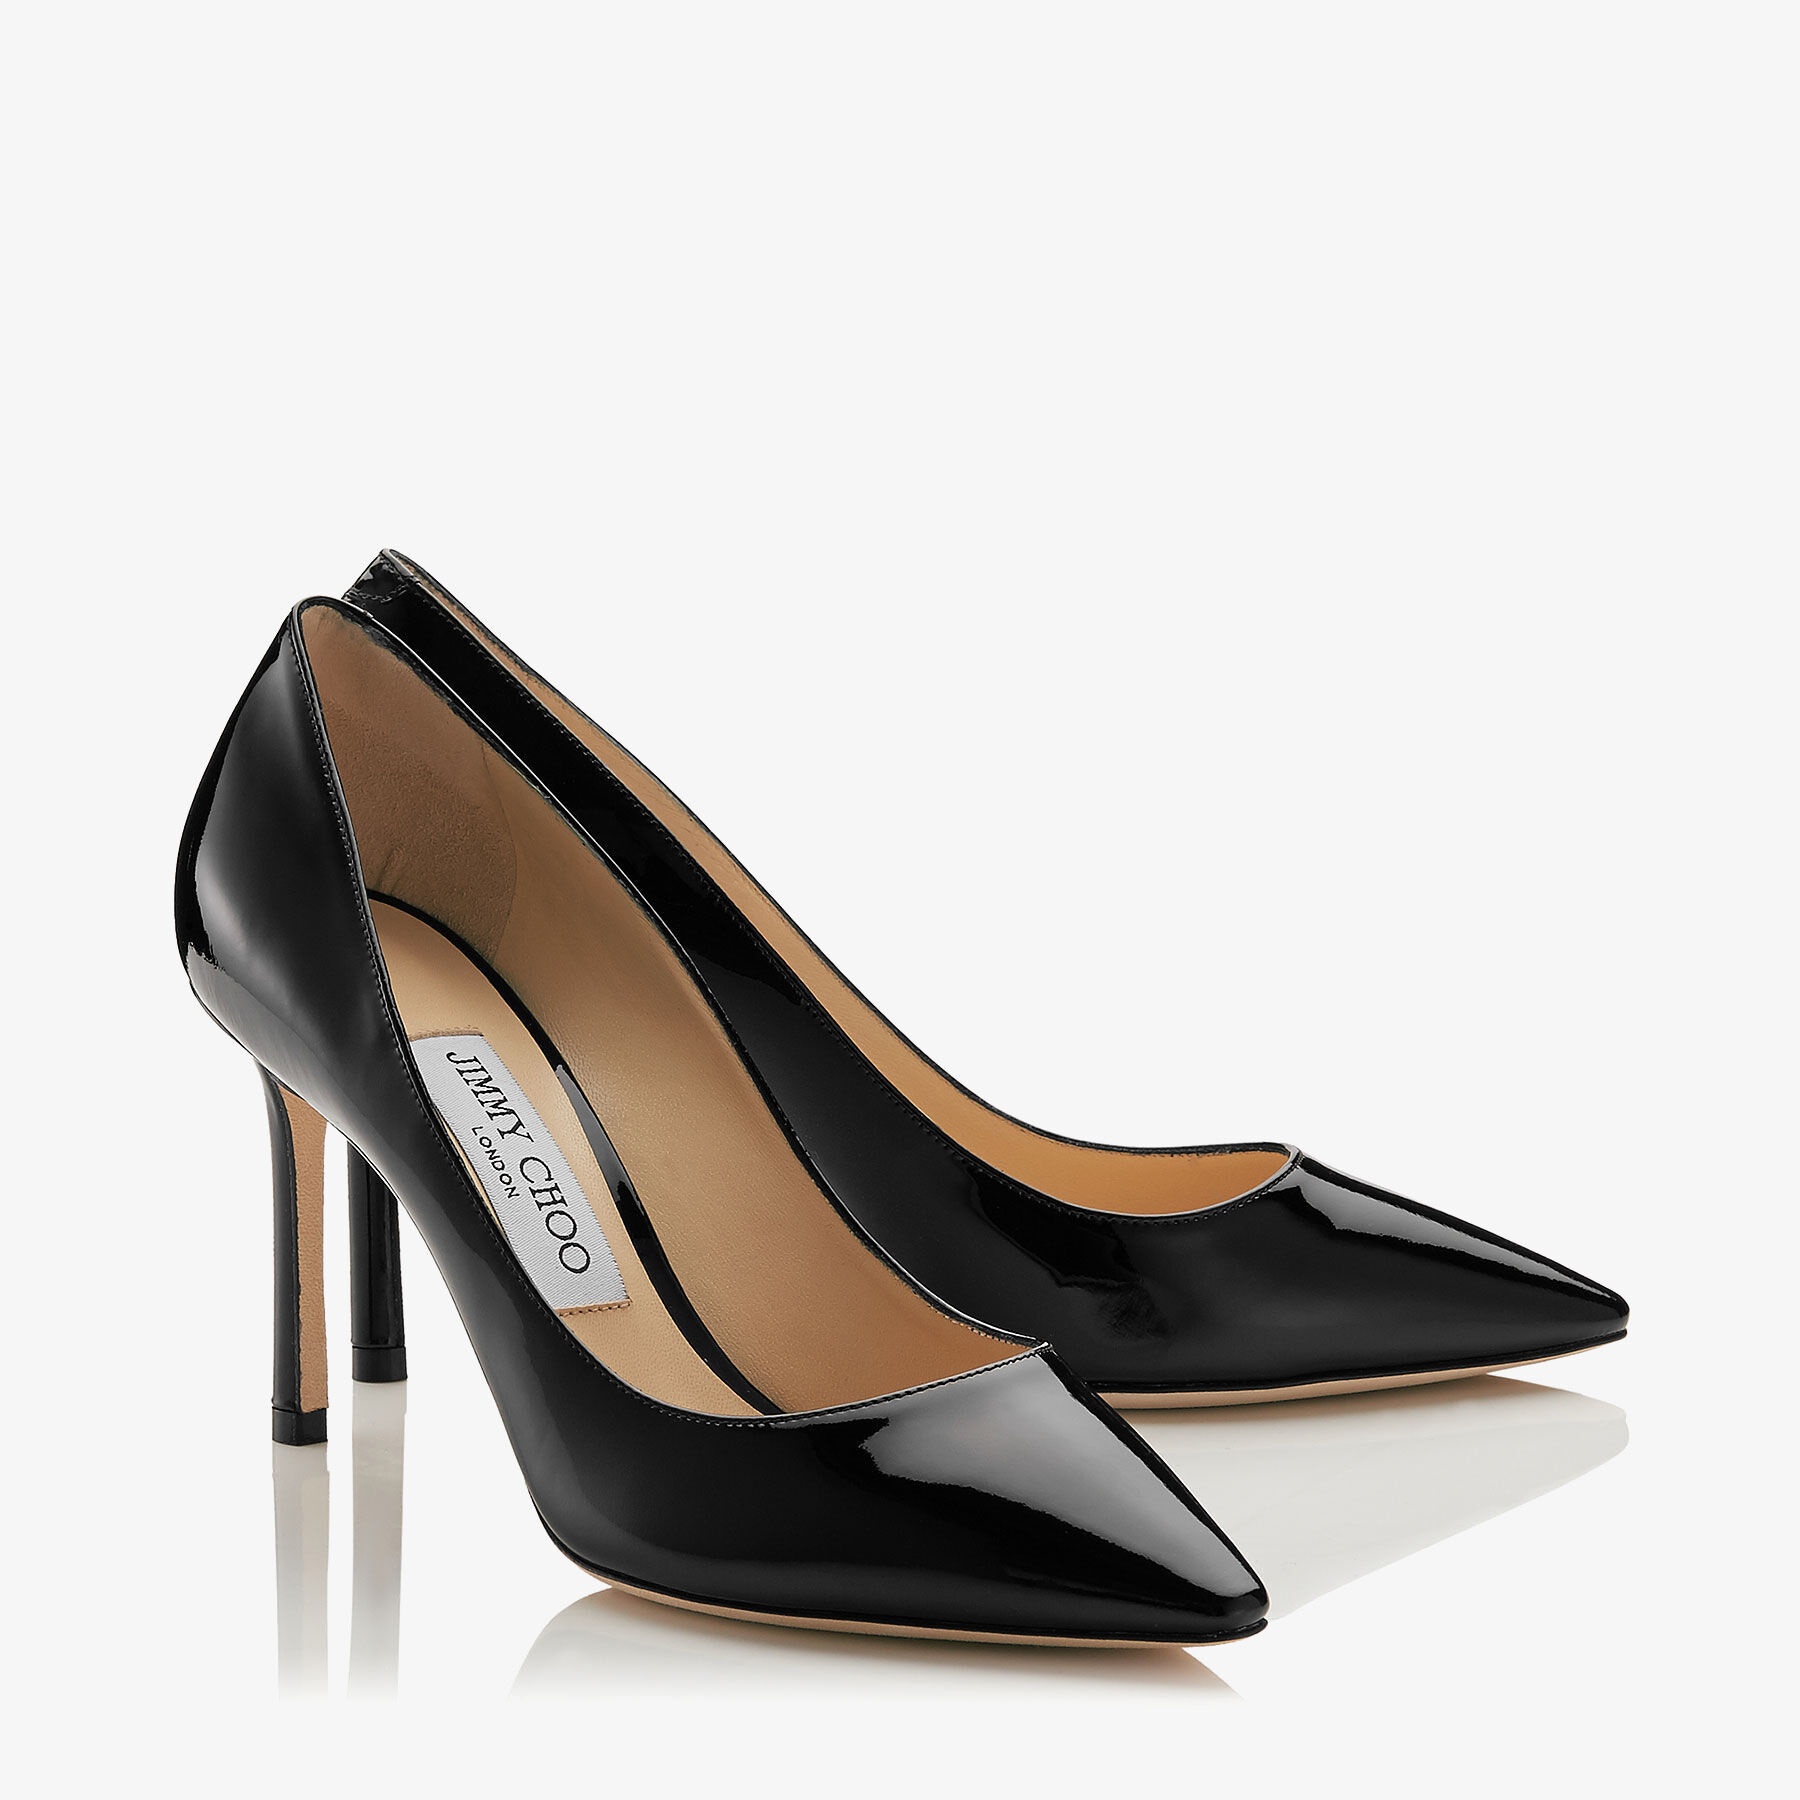 Romy 85
Black Patent Leather Pointy Toe Pumps - 3